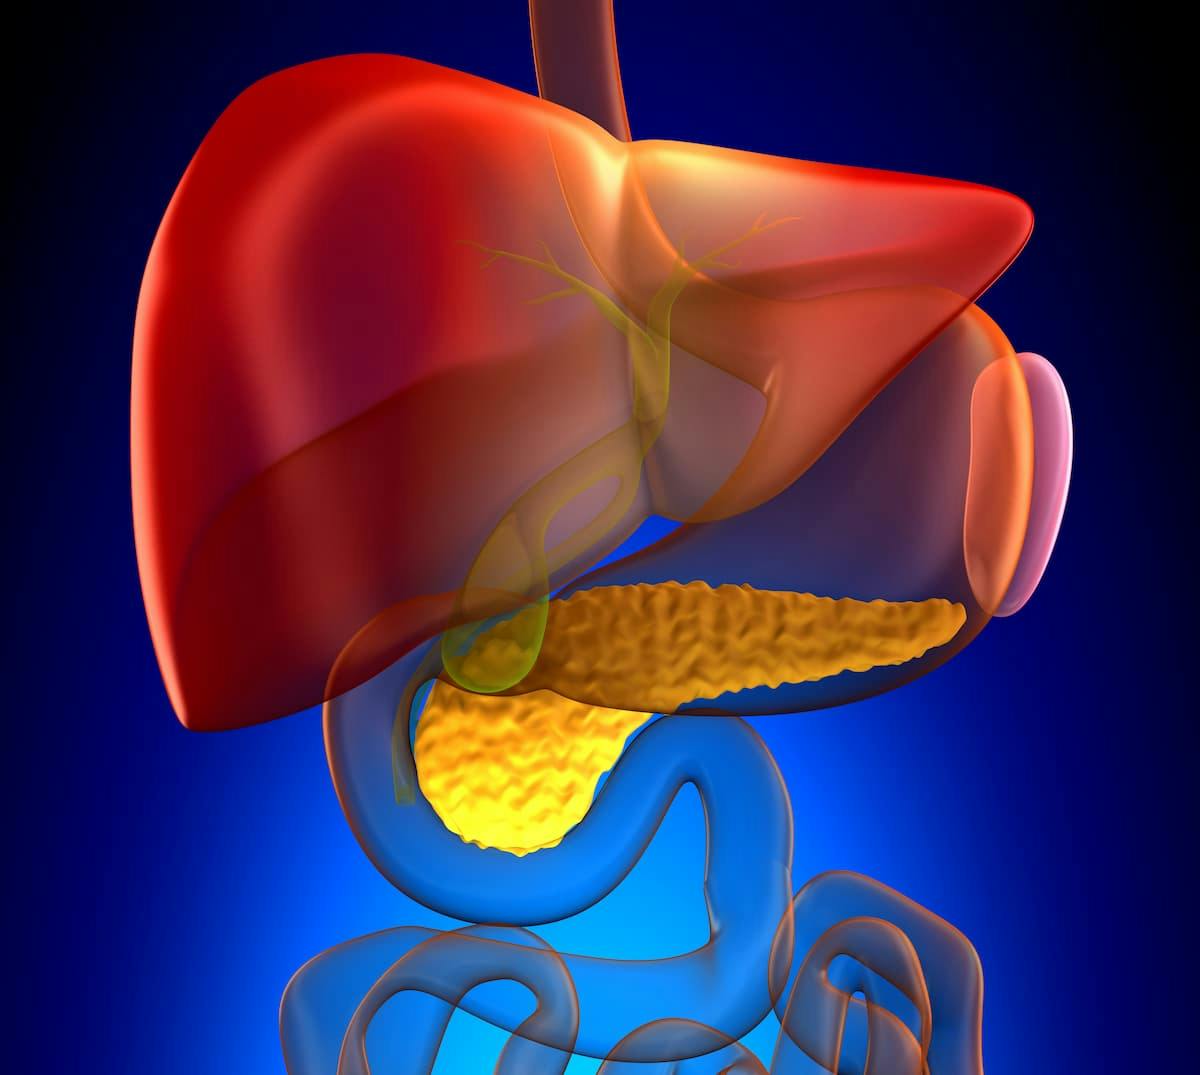 Adjuvant atezolizumab plus bevacizumab may effectively combat recurrence after surgery in patients with early-stage hepatocellular carcinoma.